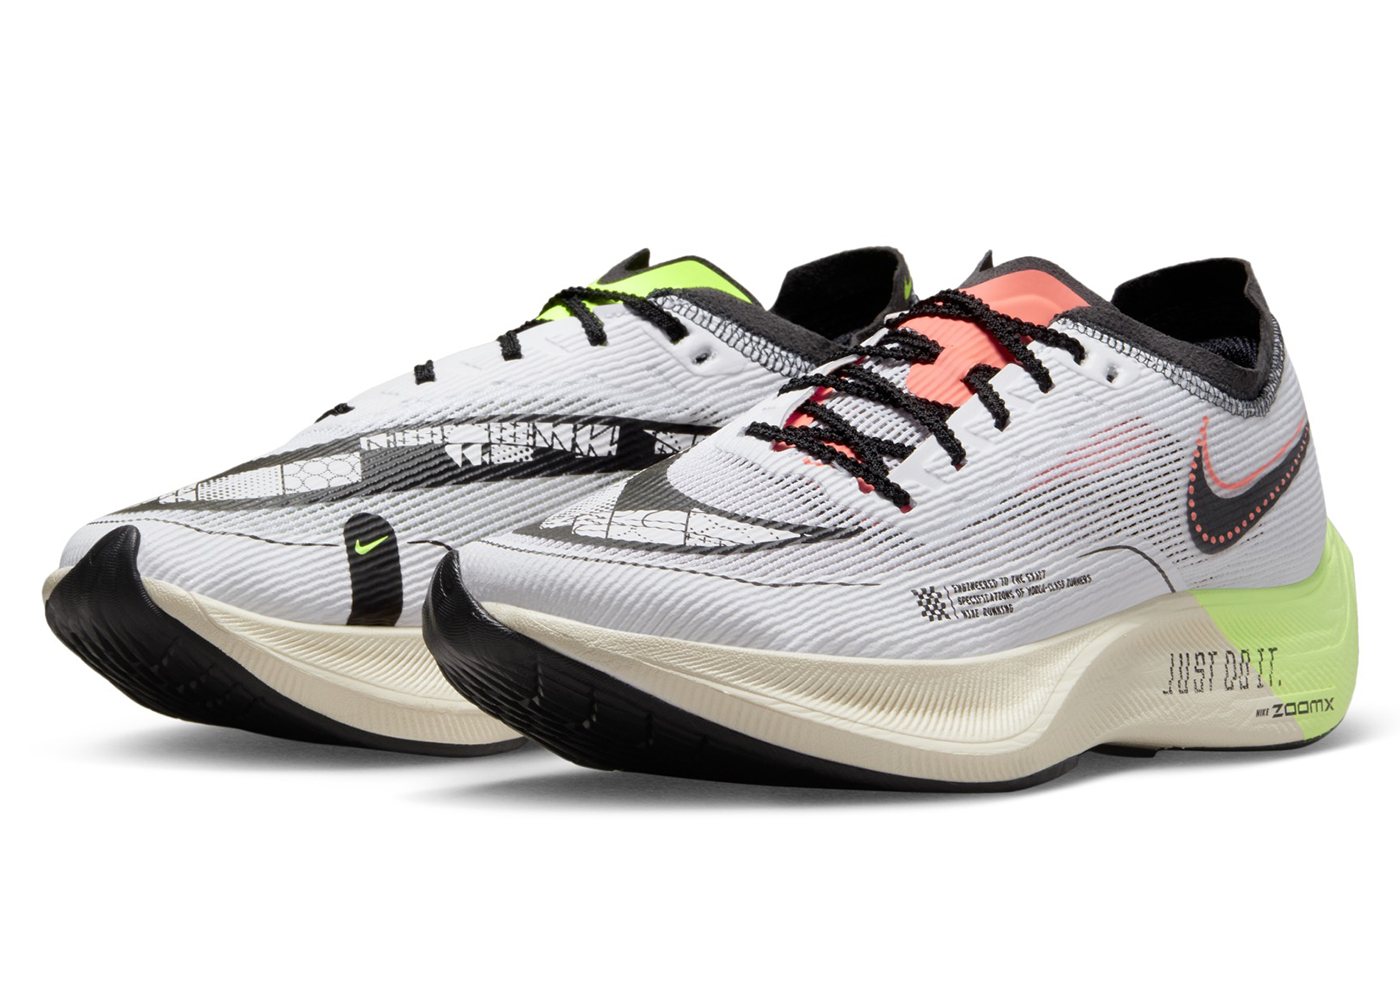 Nike ZoomX Vaporfly Next% 2 Coconut Milk Ghost Green Bright